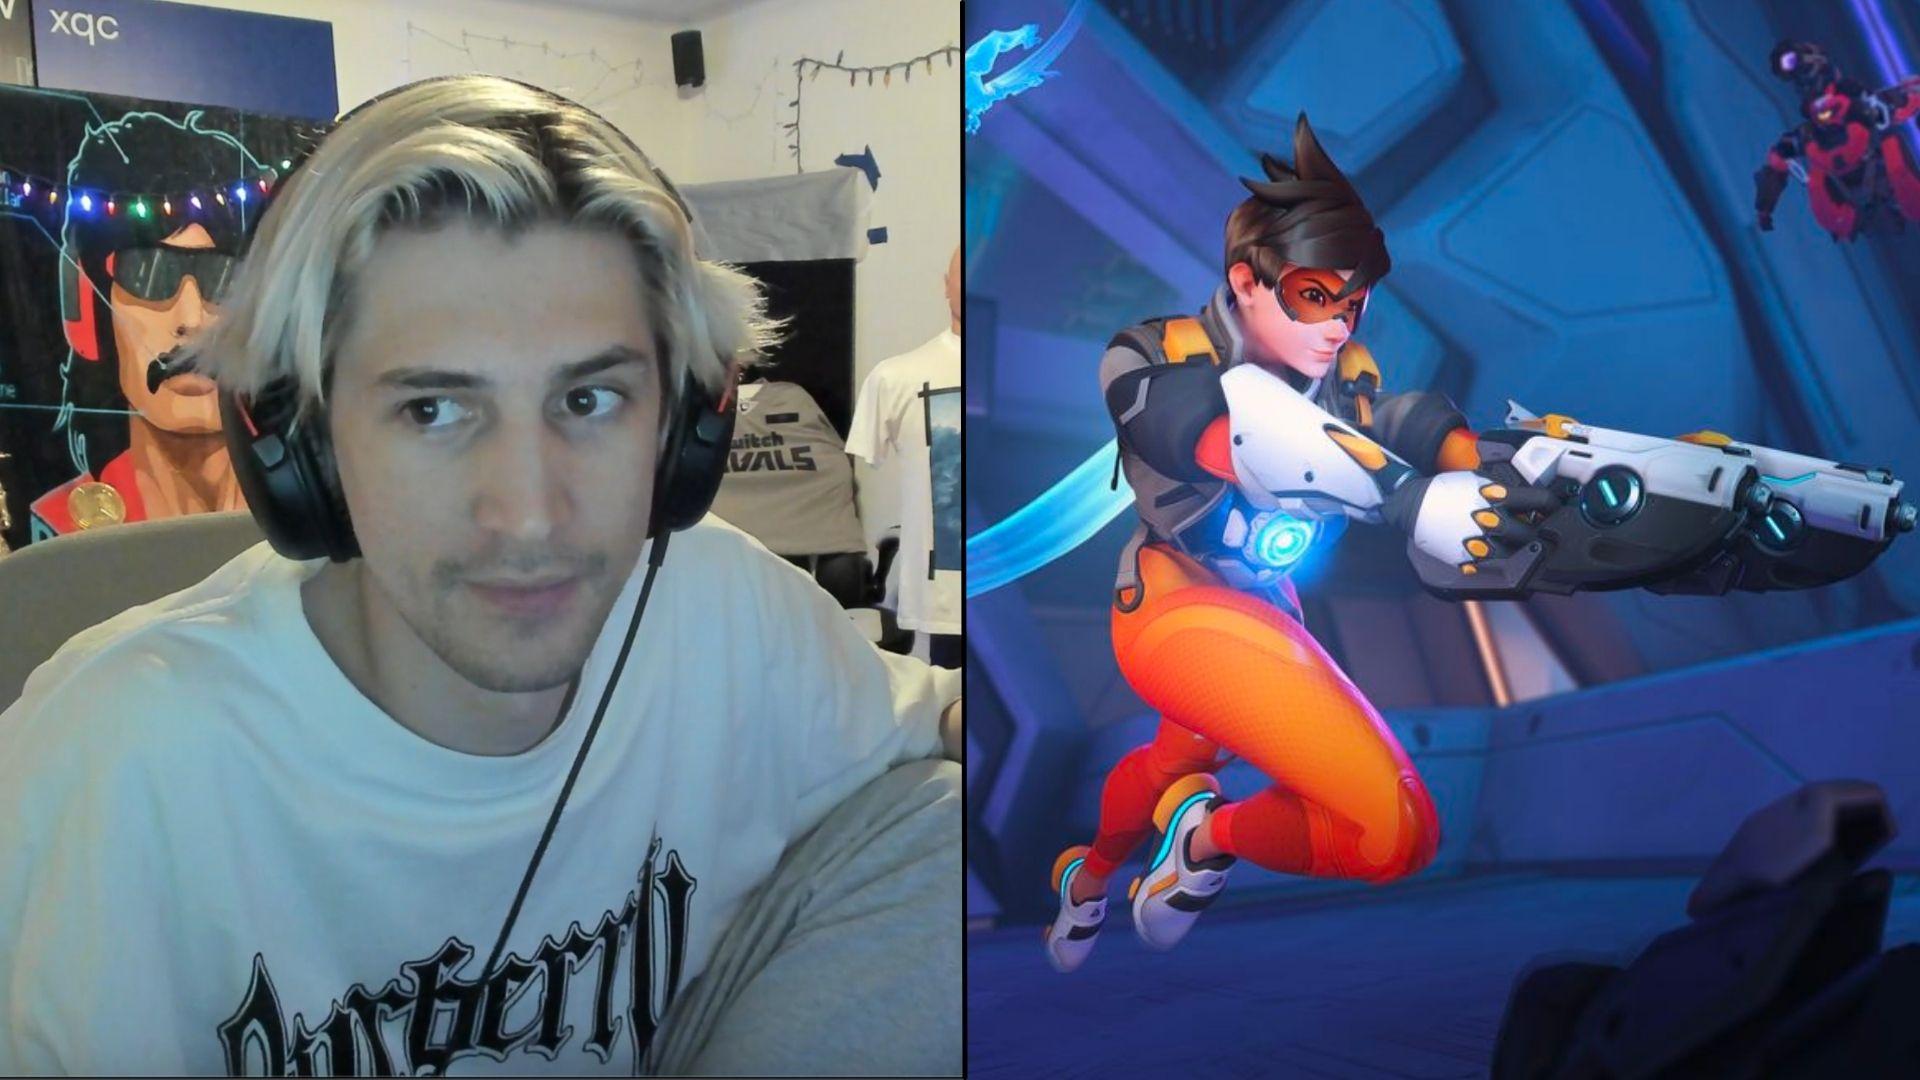 xQc side by side with Tracer in Overwatch 2